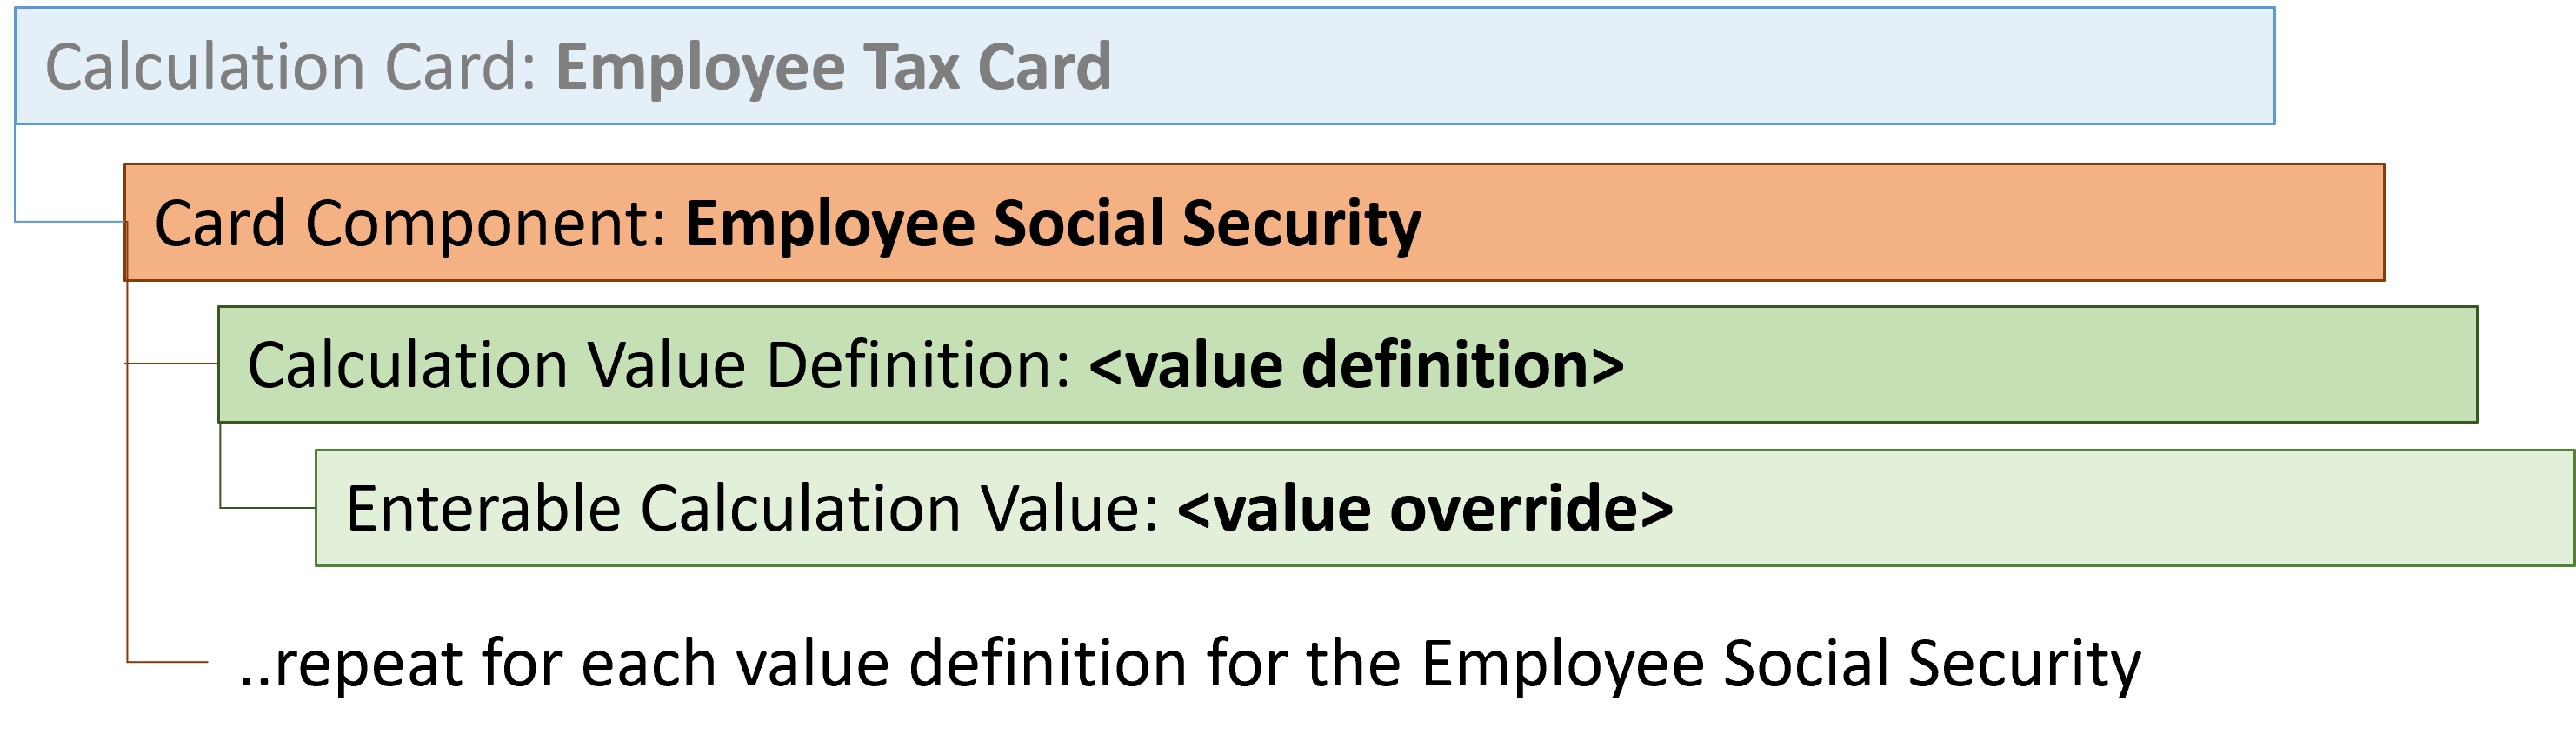 employee tax card employee social security card component